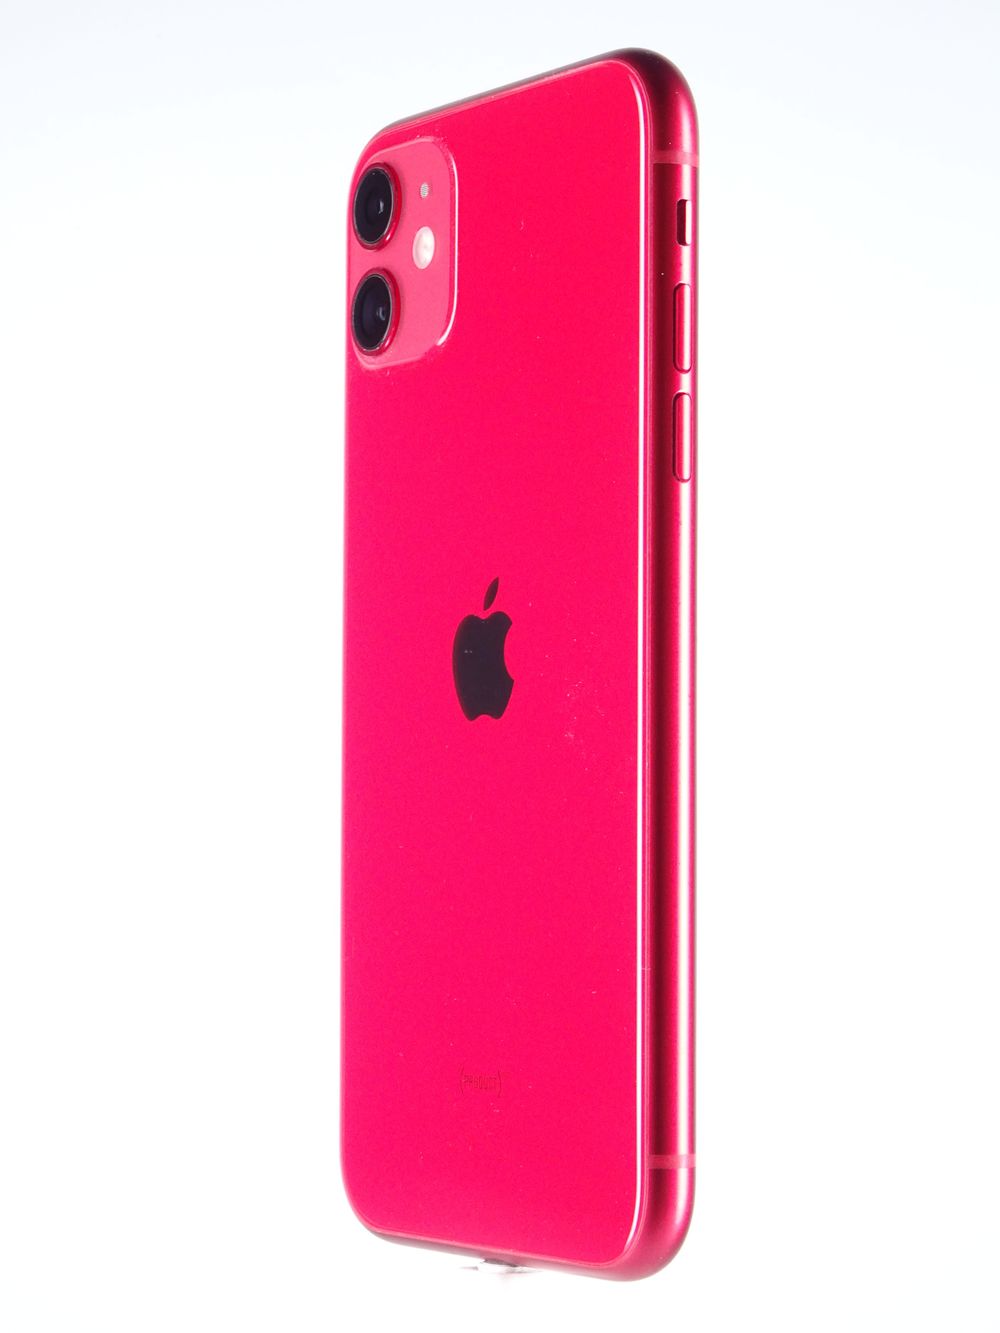 Telefon mobil Apple iPhone 11, Red, 256 GB,  Excelent